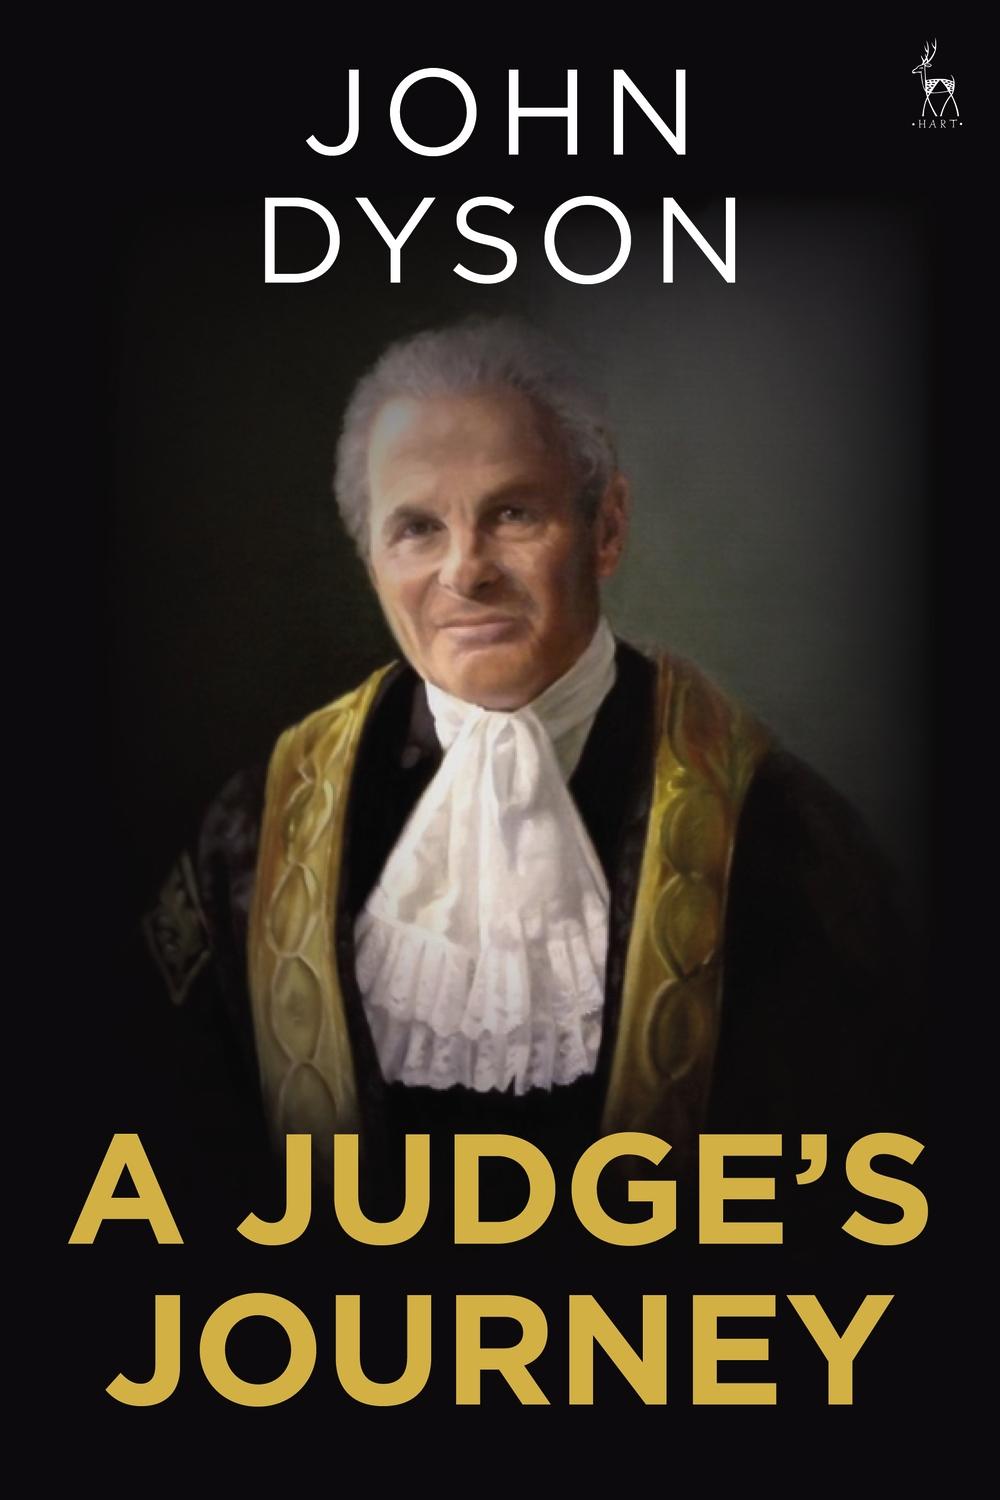 Judge's Journey - Lord Dyson